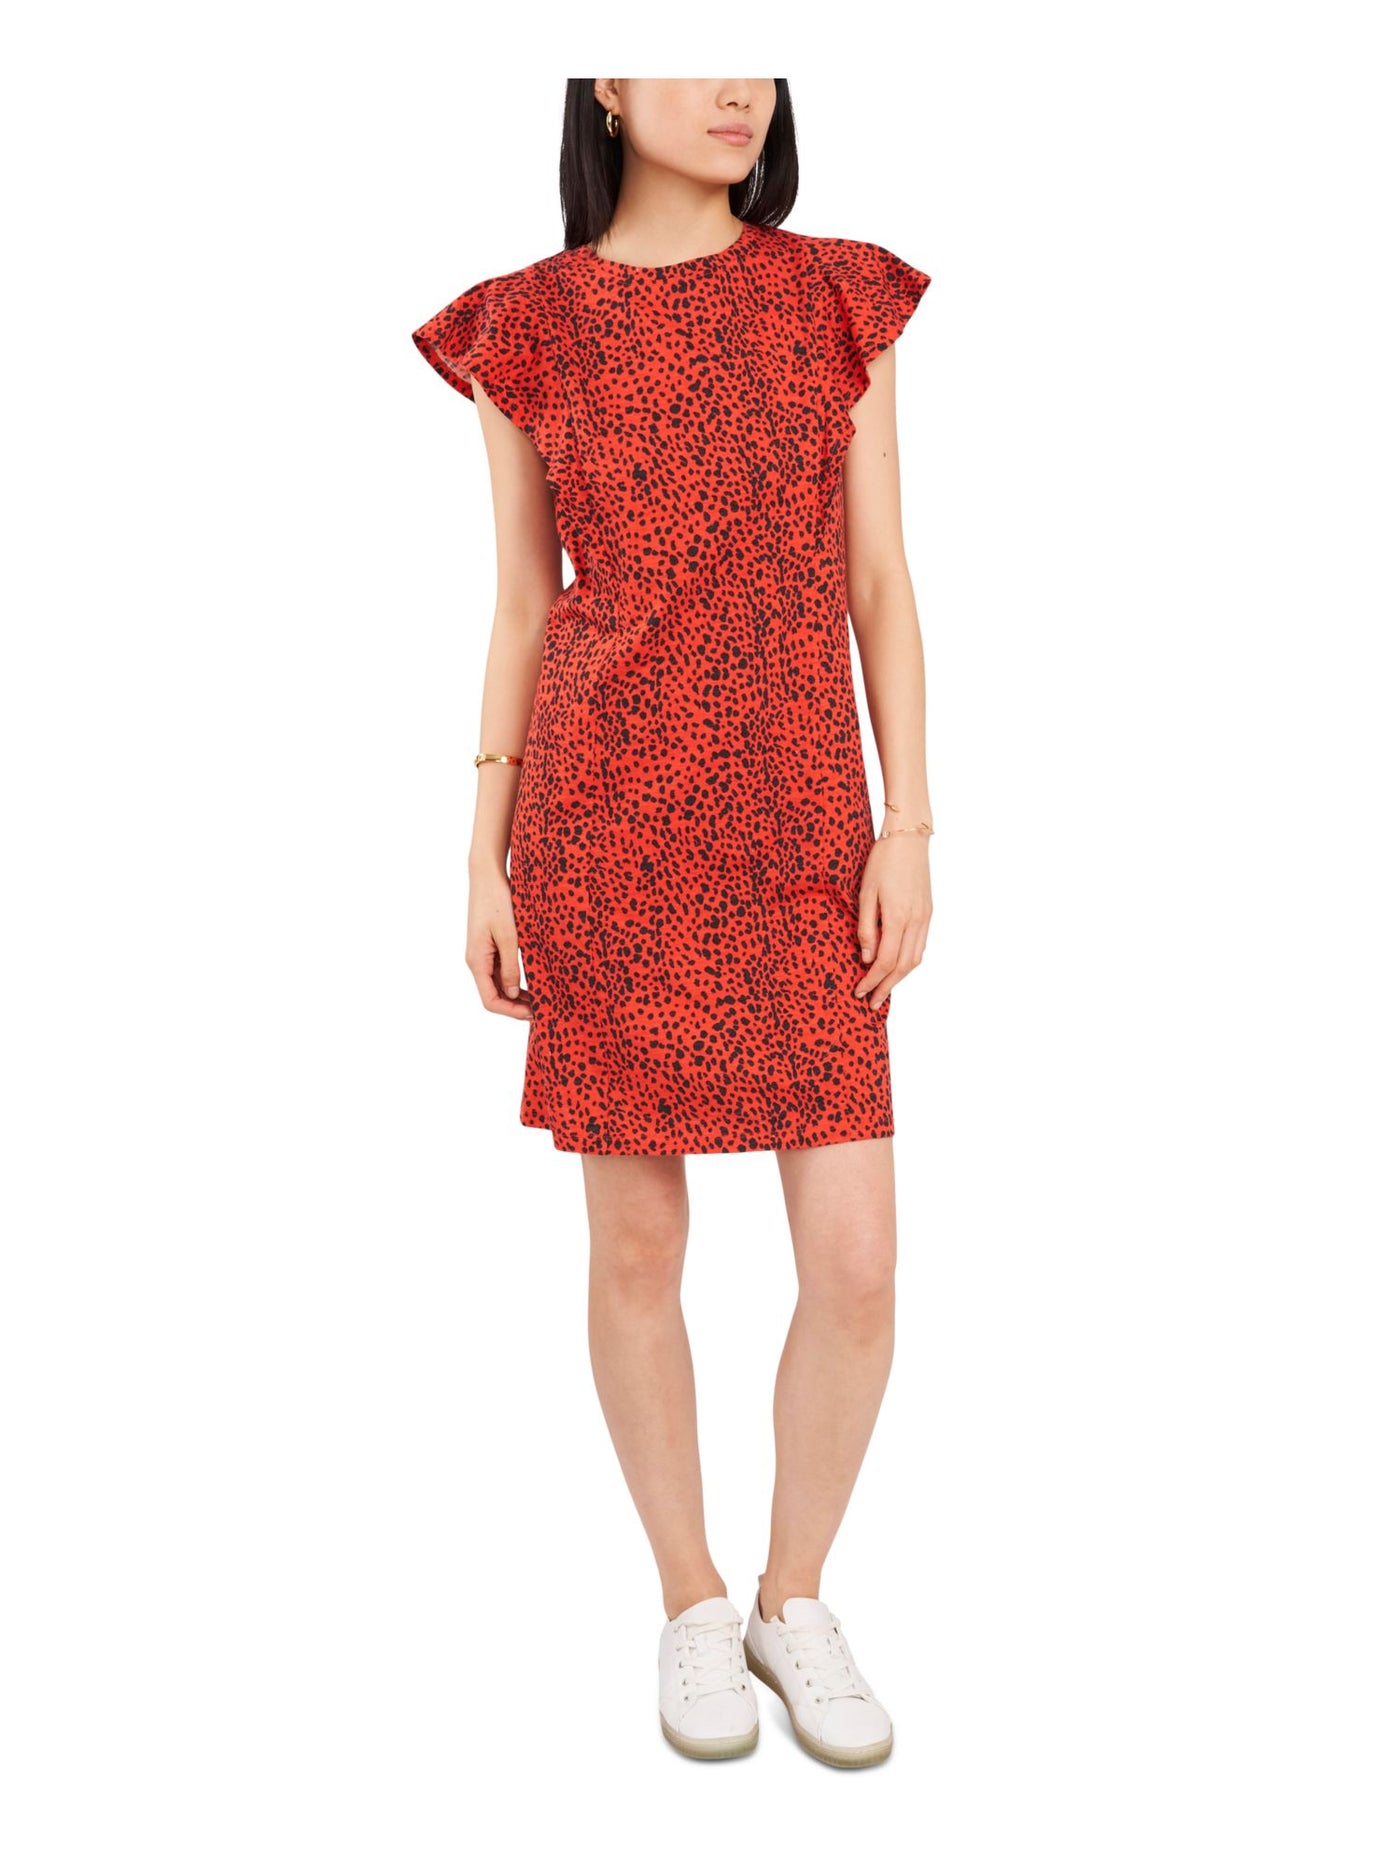 VINCE CAMUTO Womens Red Animal Print Flutter Sleeve Round Neck Short Party Dress L